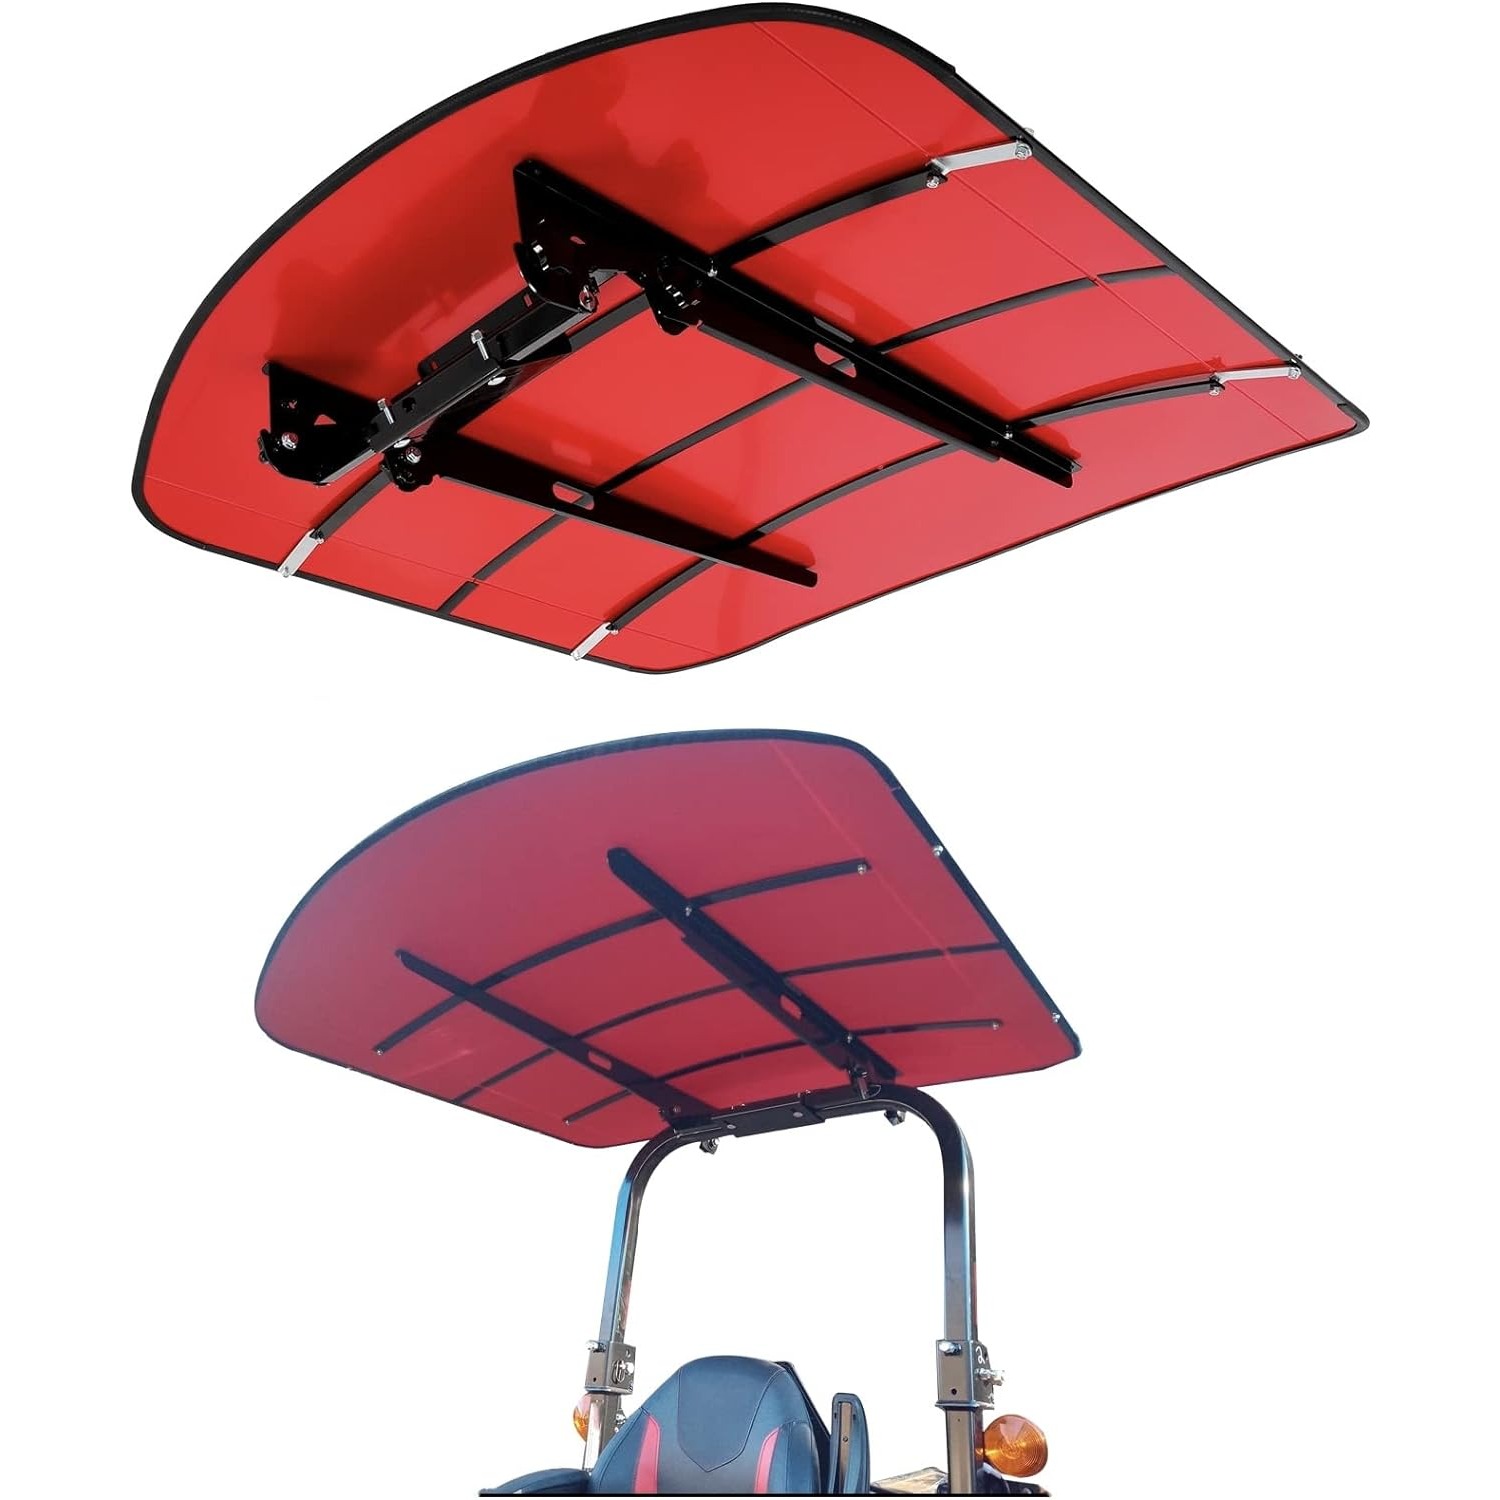 

Tractor Canopy For Rops 48-3/8" X 48-3/8" - Red Rops Canopy For Tractor And Mowers Umbrella (will Add About 4'' To The Height Of The Tractor)